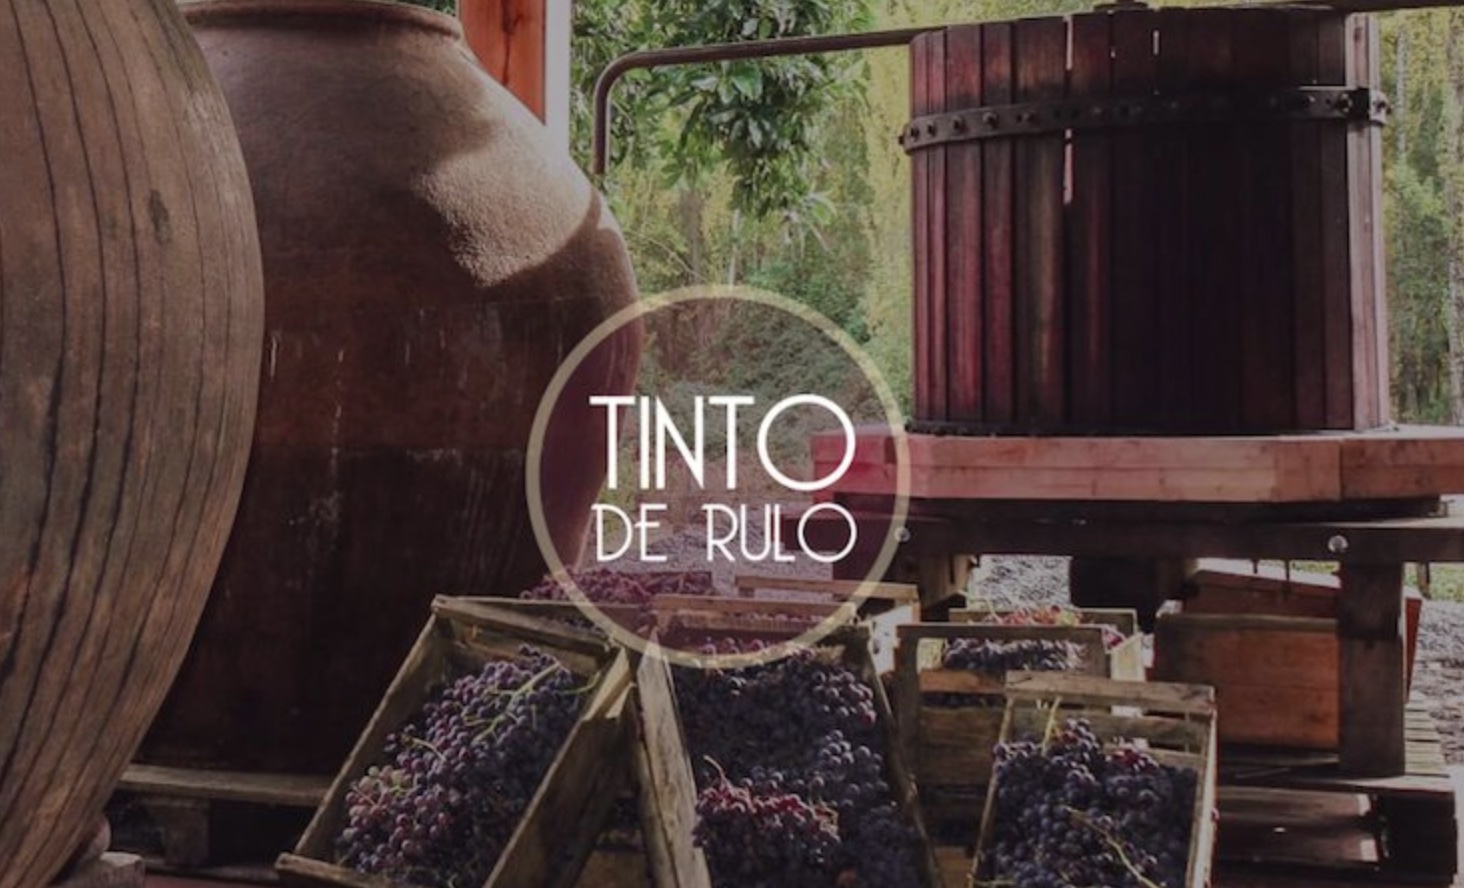 Tinto de Rulo winery in Itata, guide to Chilean wines and wineries